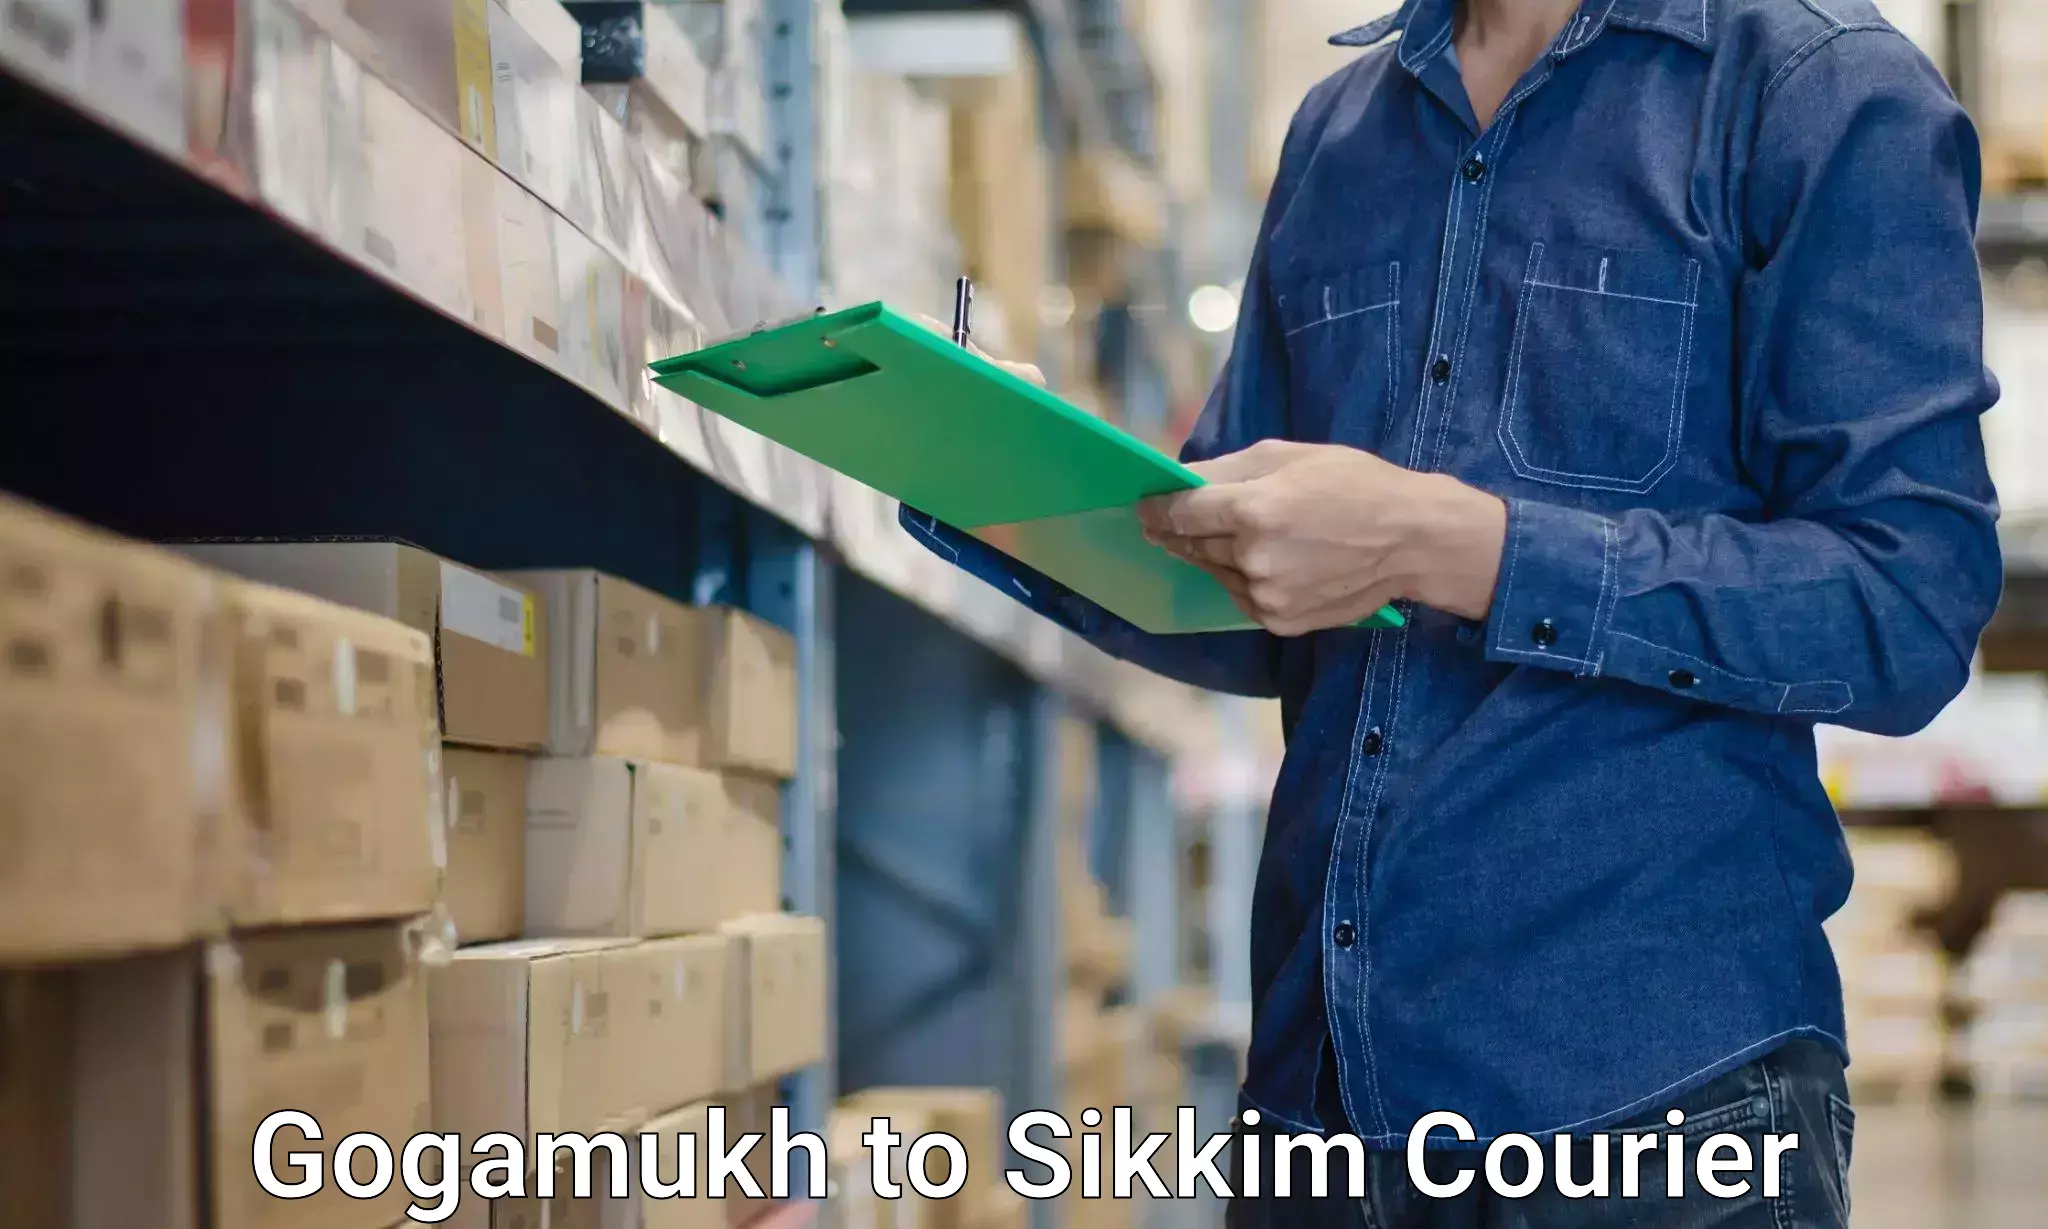 Furniture delivery service Gogamukh to Pelling